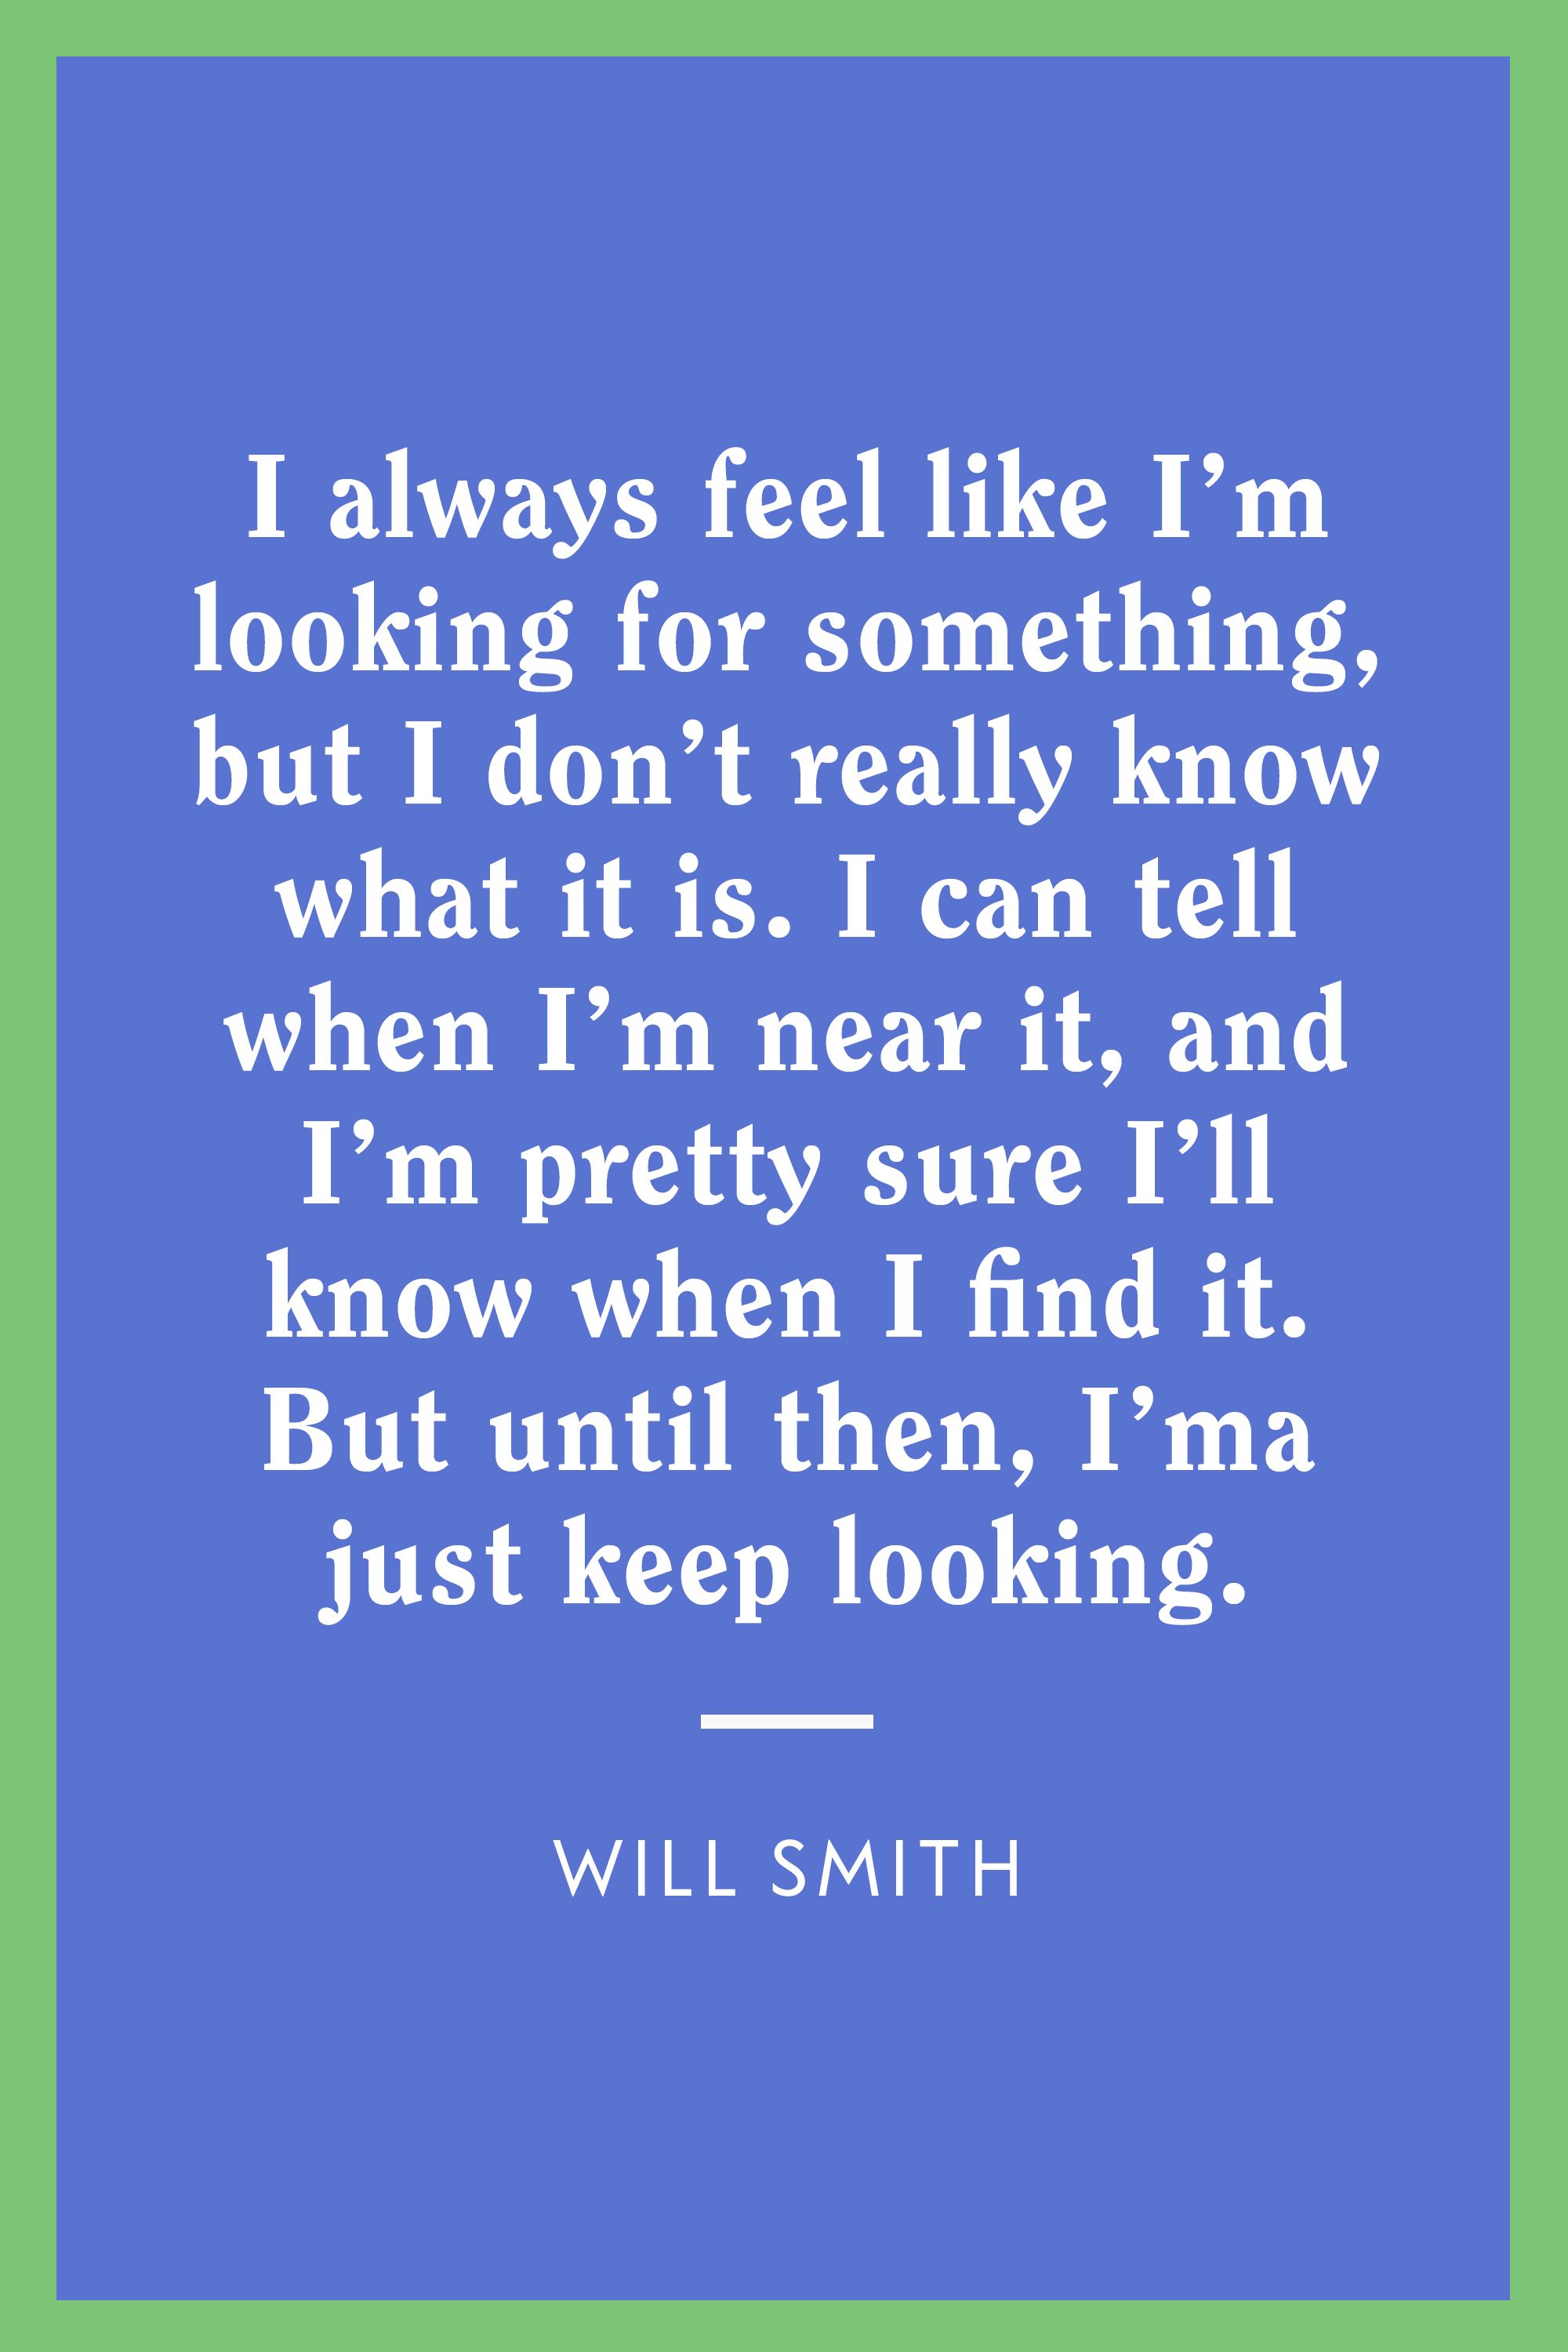 8 Inspiring Will Smith Quotes On Life Success And Perseverance